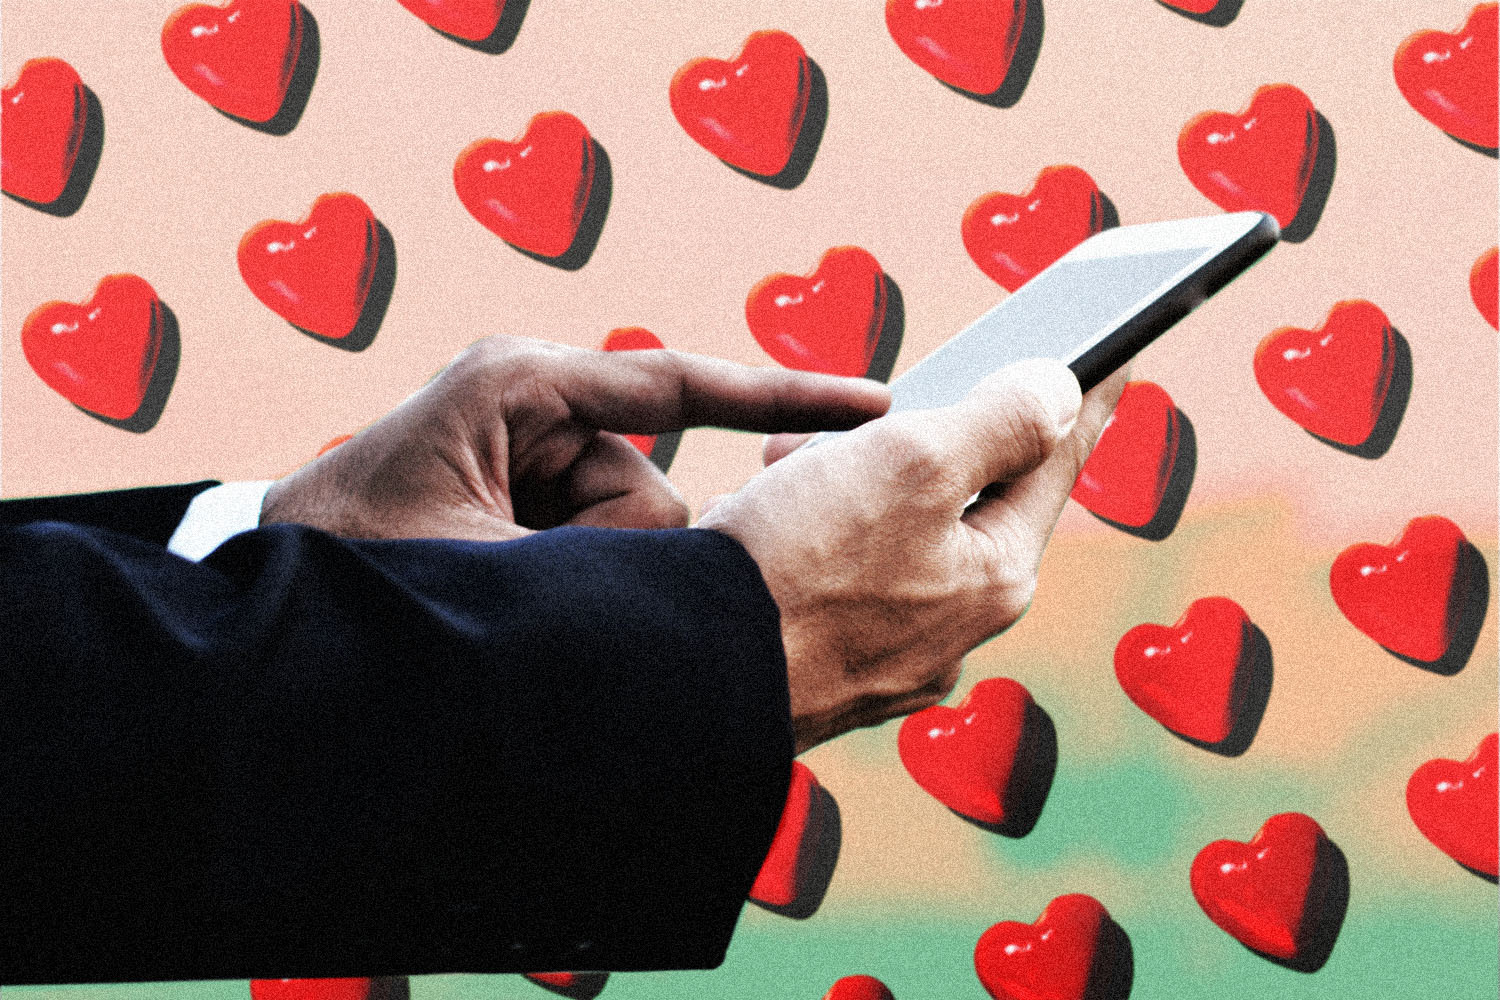 top rated dating apps for over 50